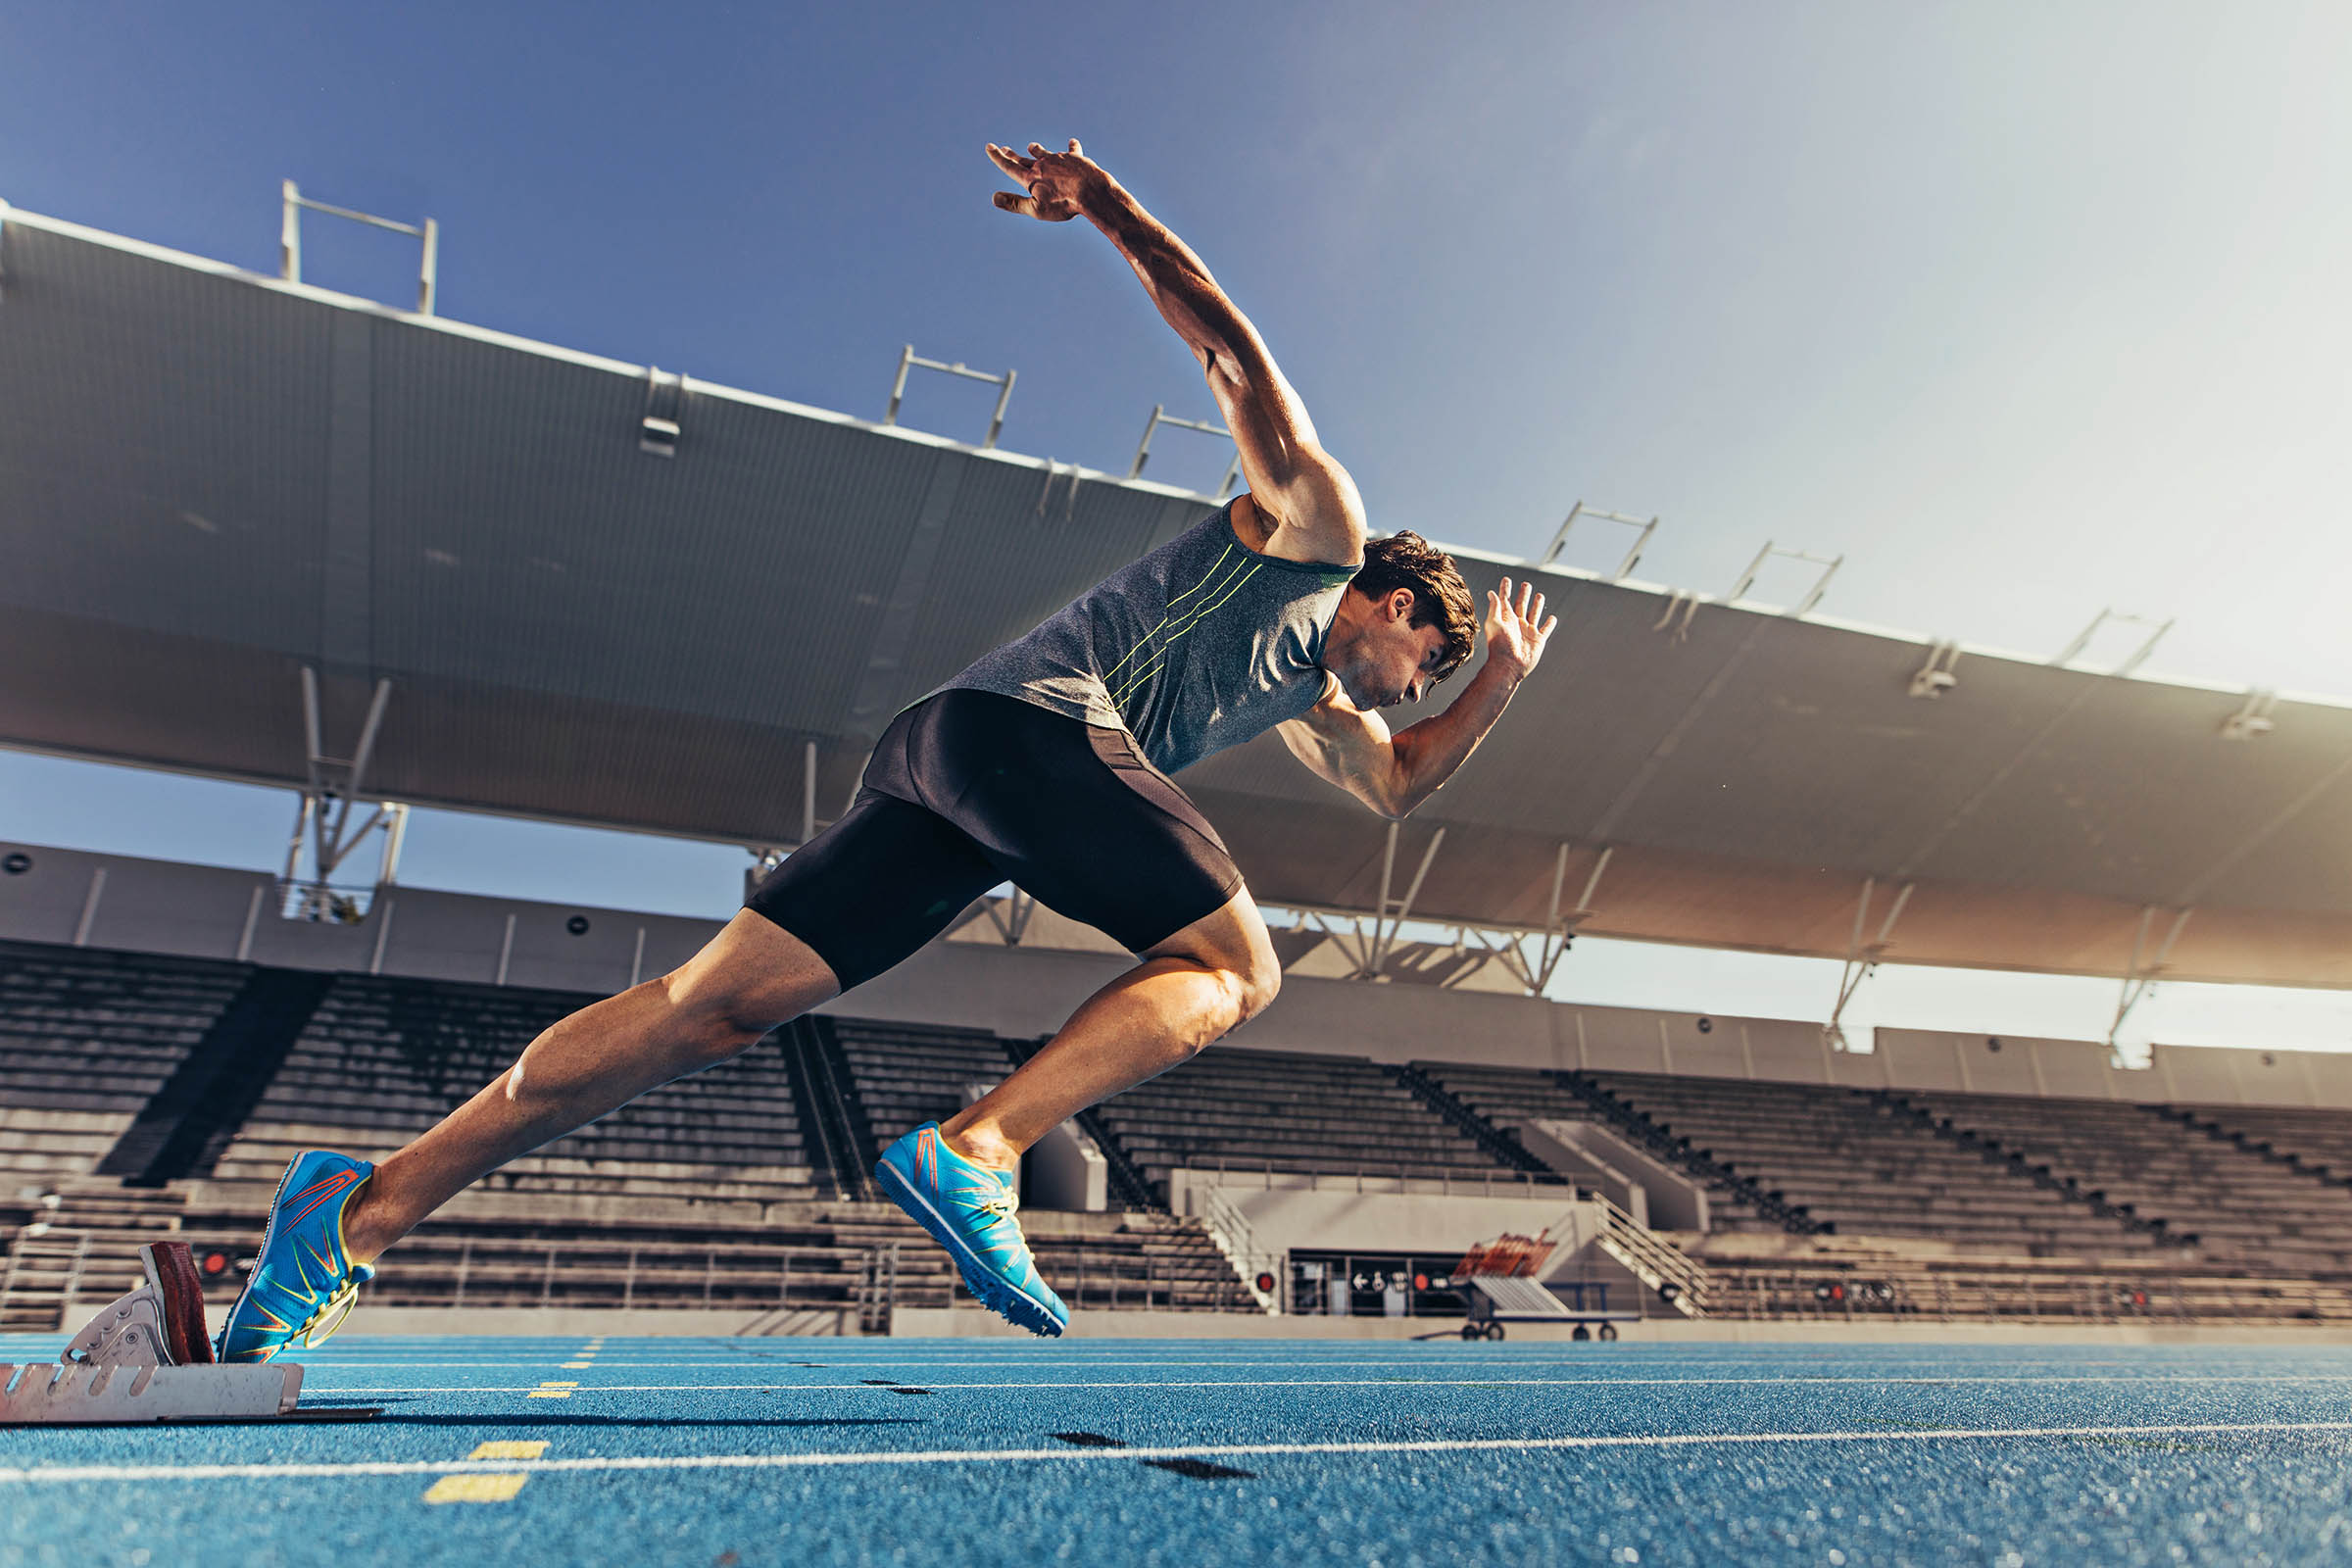 Sprinter taking off using starting blocks to start his run on running track in a stadium. Athlete starting his sprint on an all-weather running track.